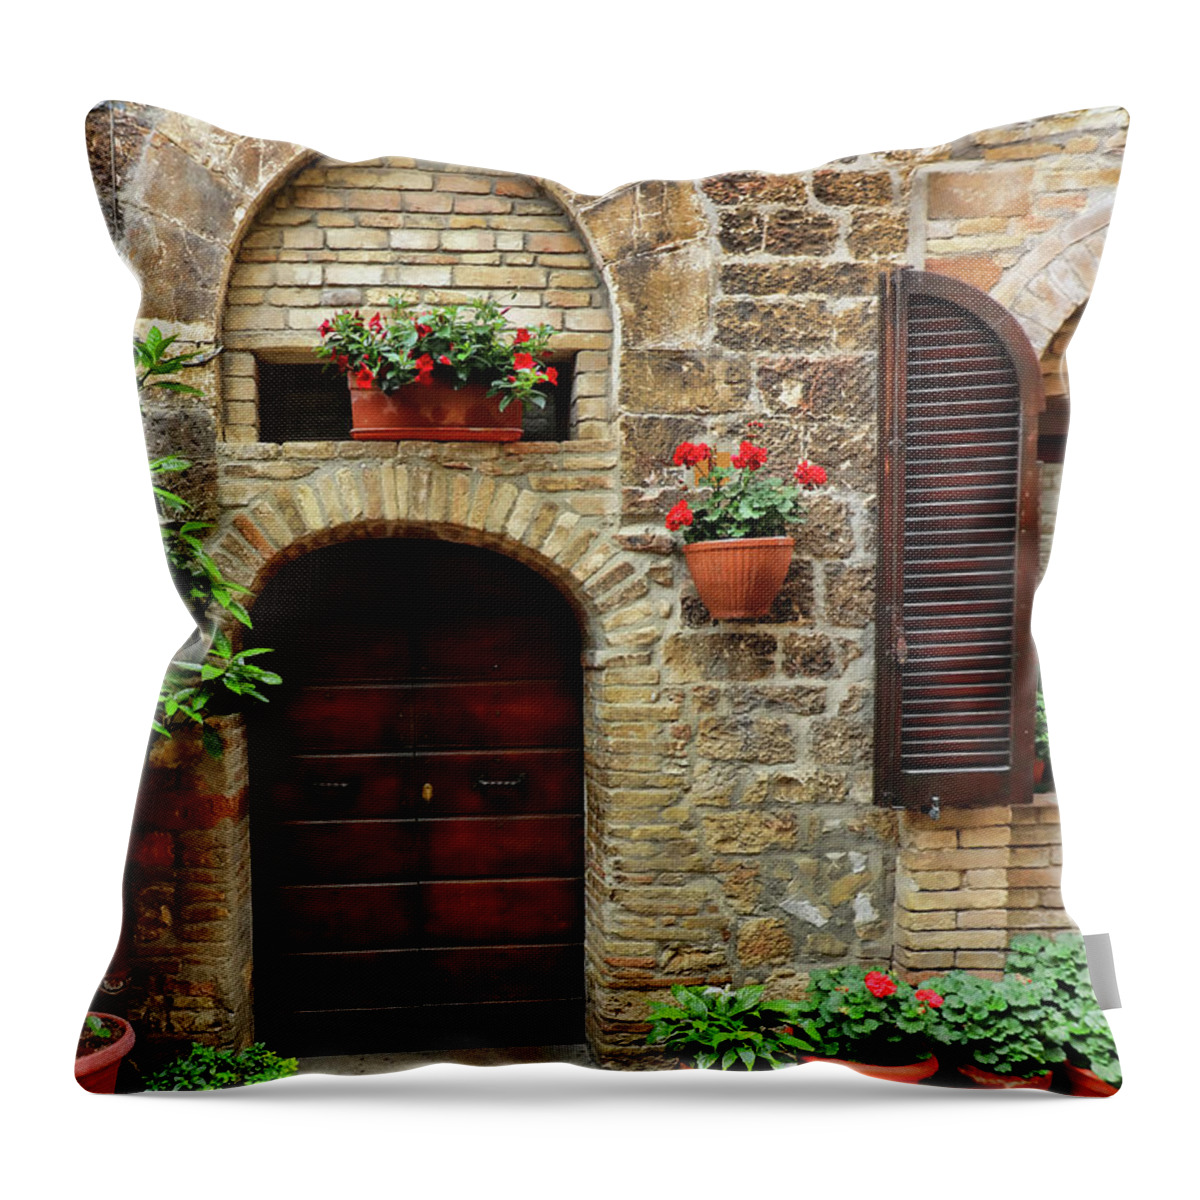 Assisi Throw Pillow featuring the photograph Assisi Doors 0580 by Jack Schultz